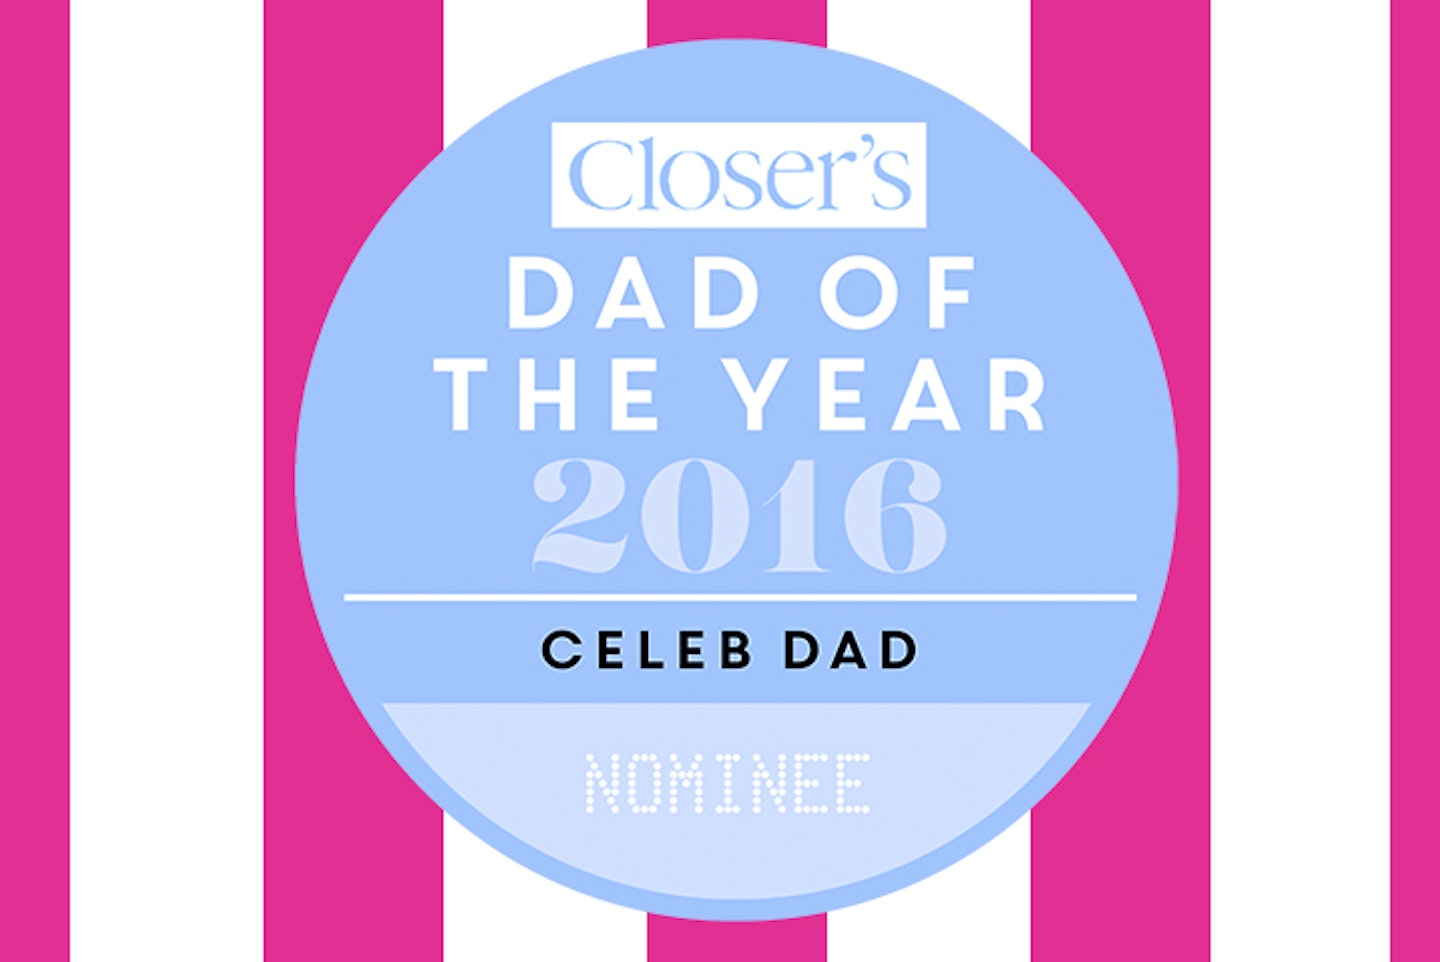 Closer's Celebrity Dad of the Year 2016